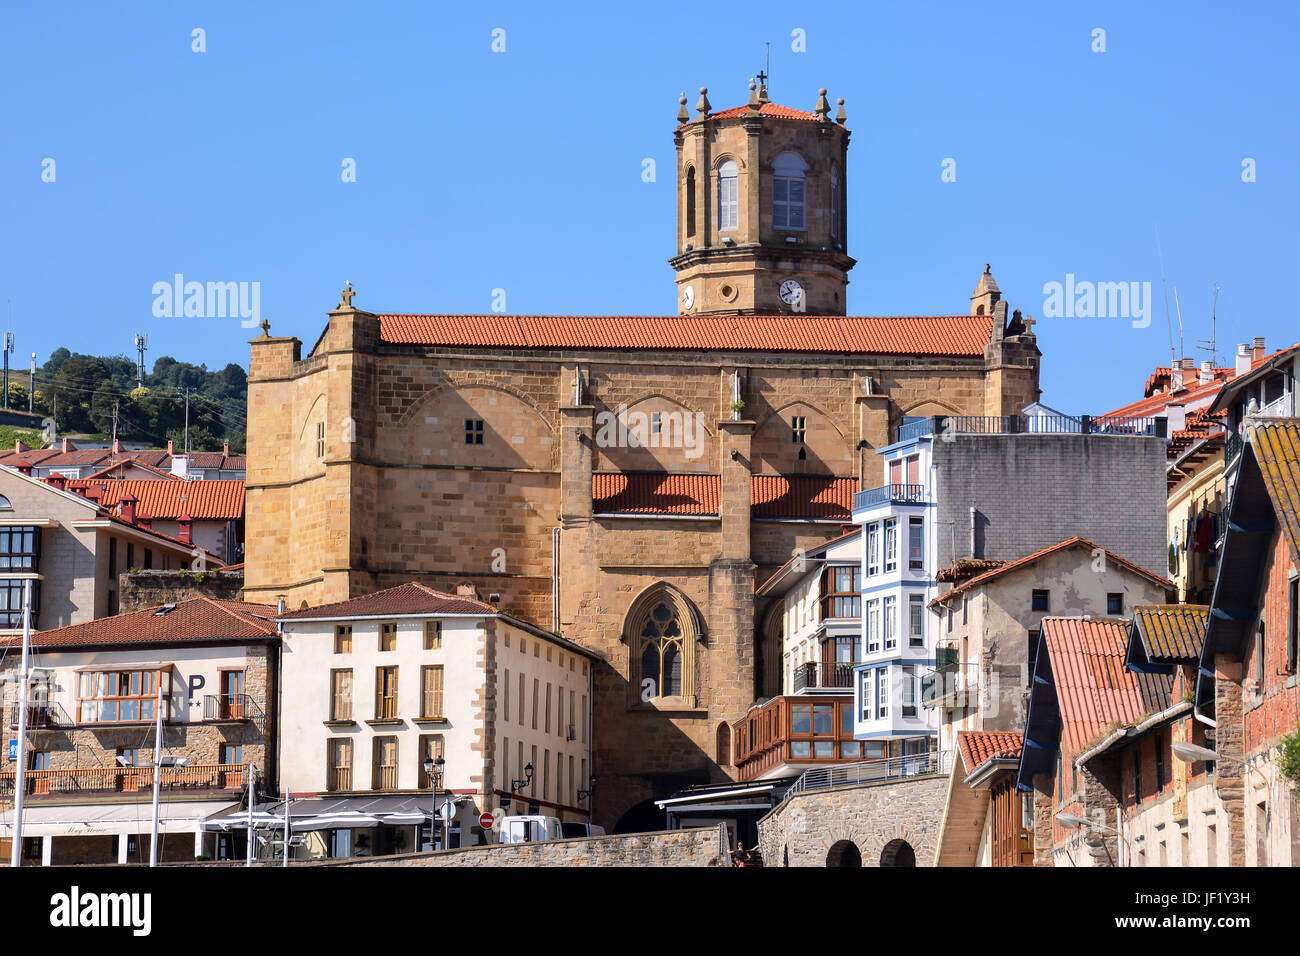 Town of Getaria Basque Country Spain Stock Photo